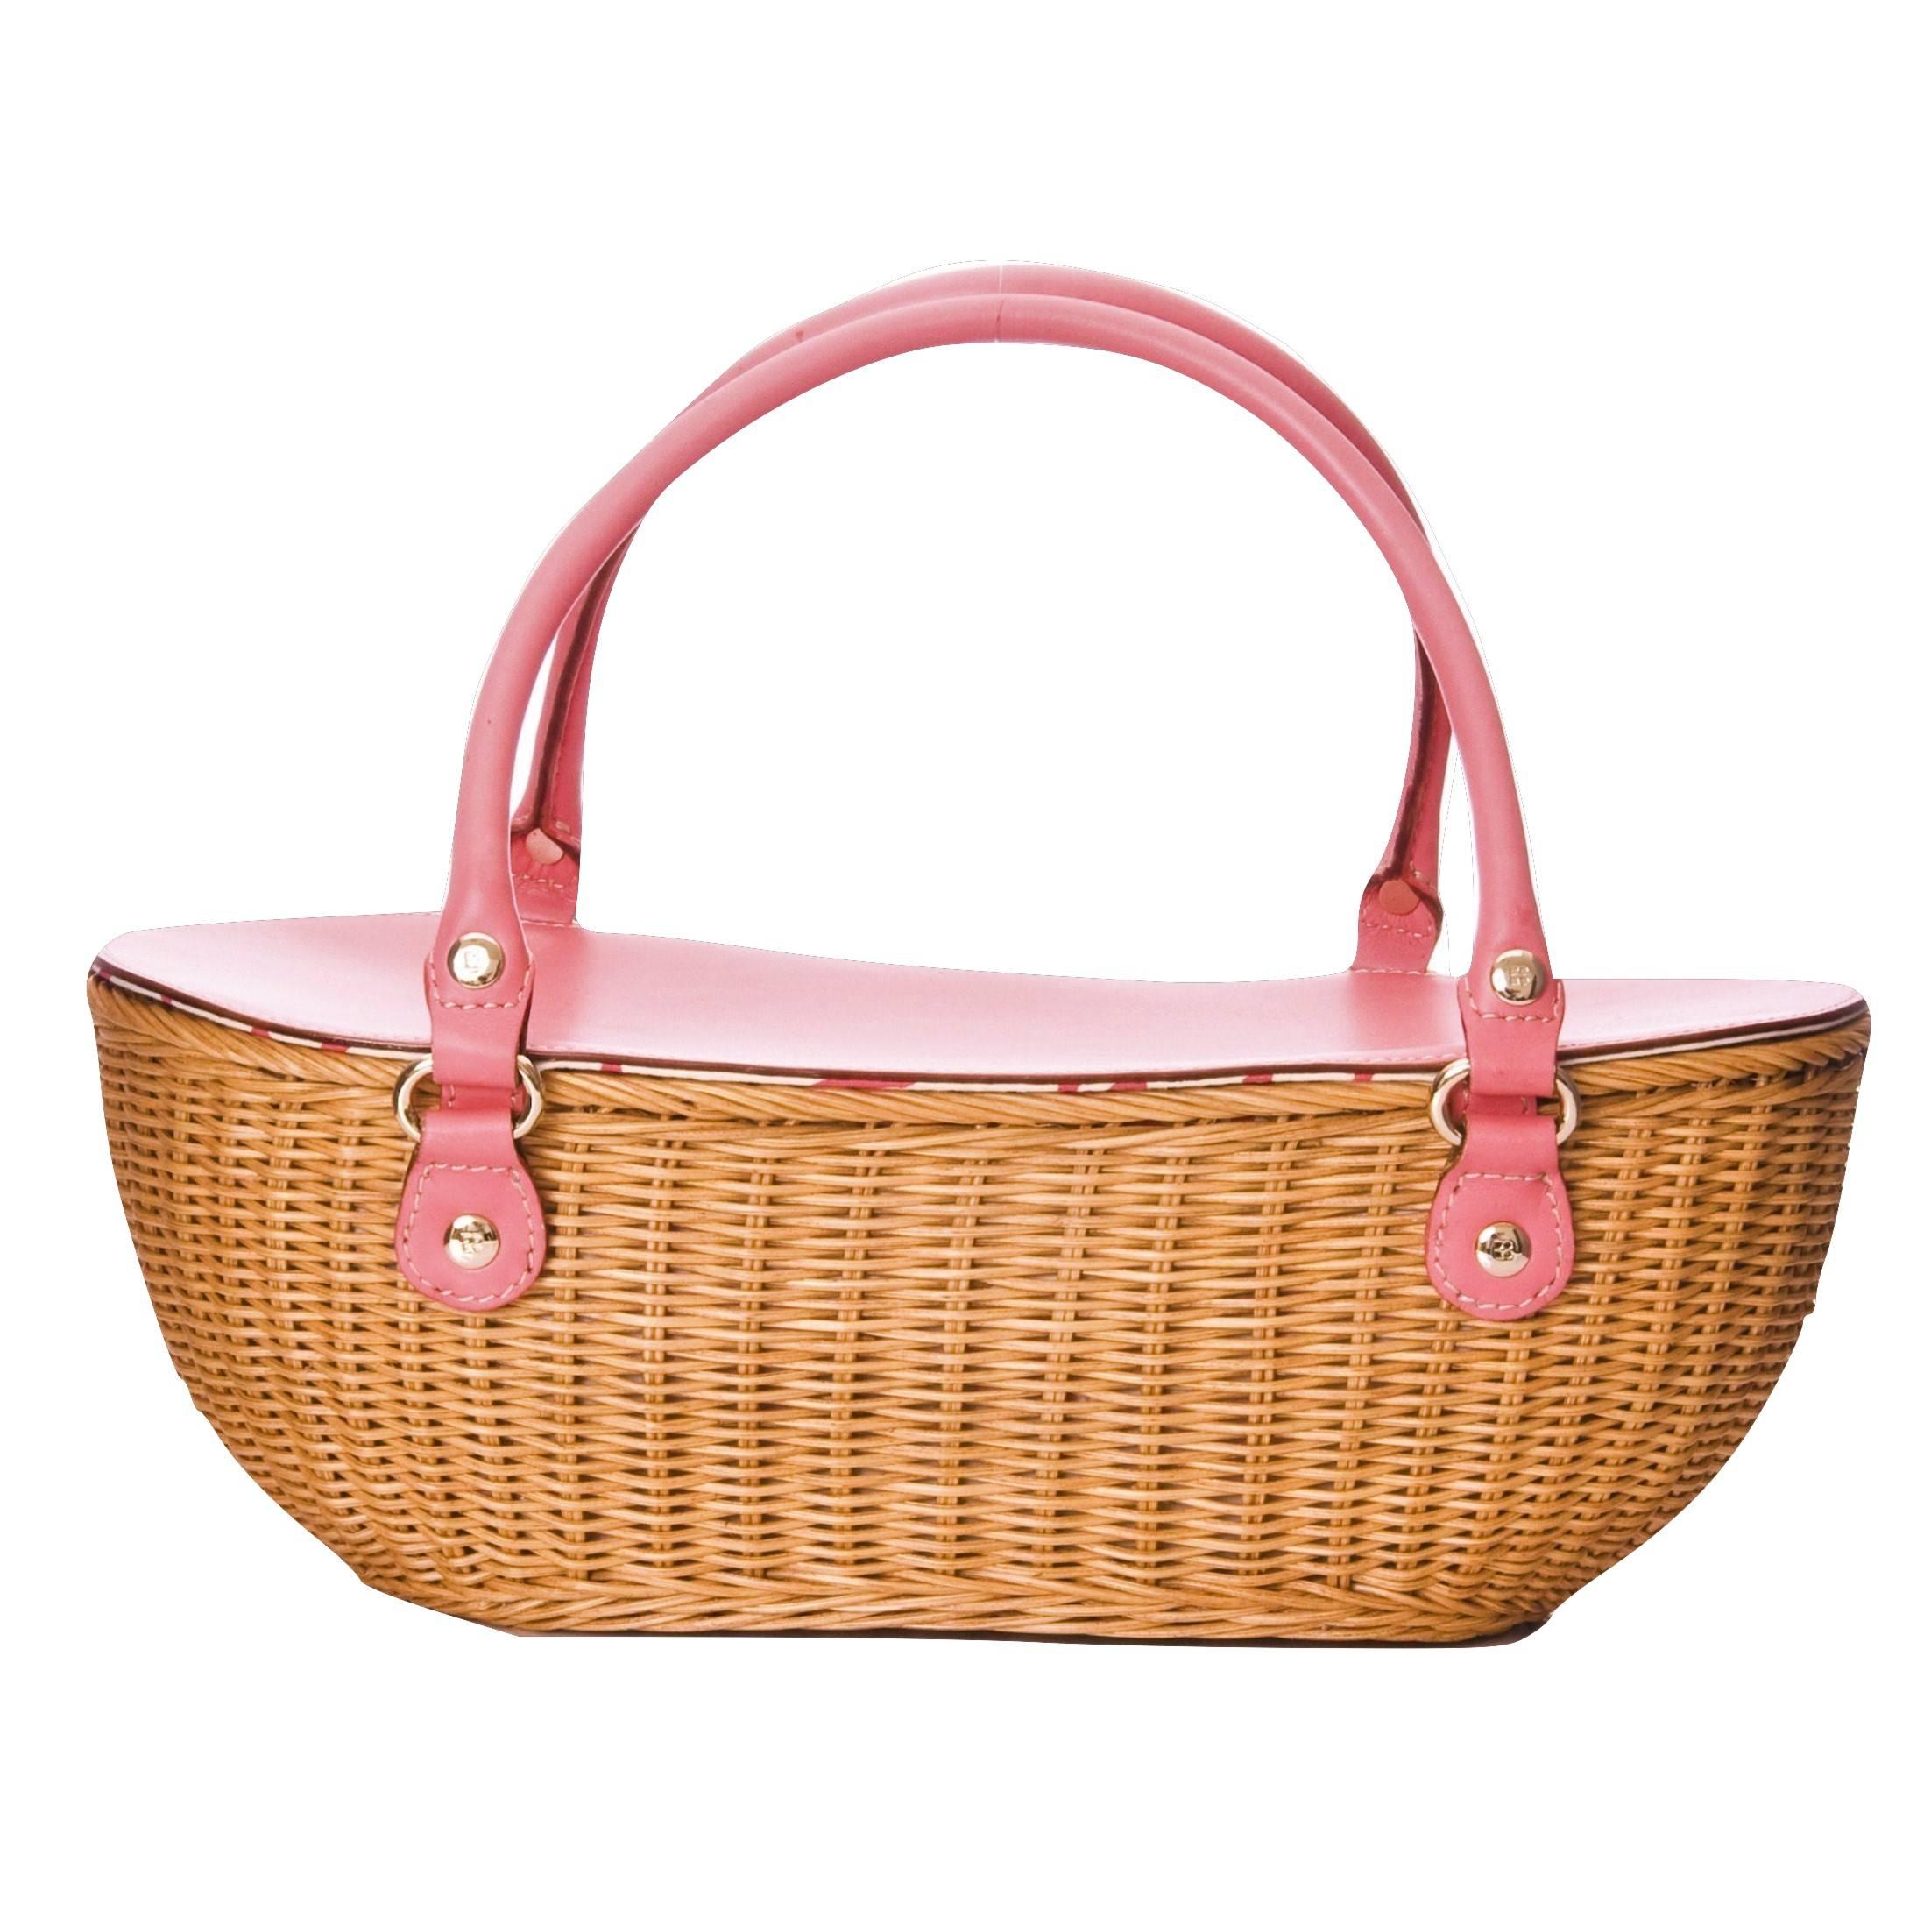 New Kate Spade Her Rare Large Collectible Spring 2005 Pink Wicker Basket Bag 4